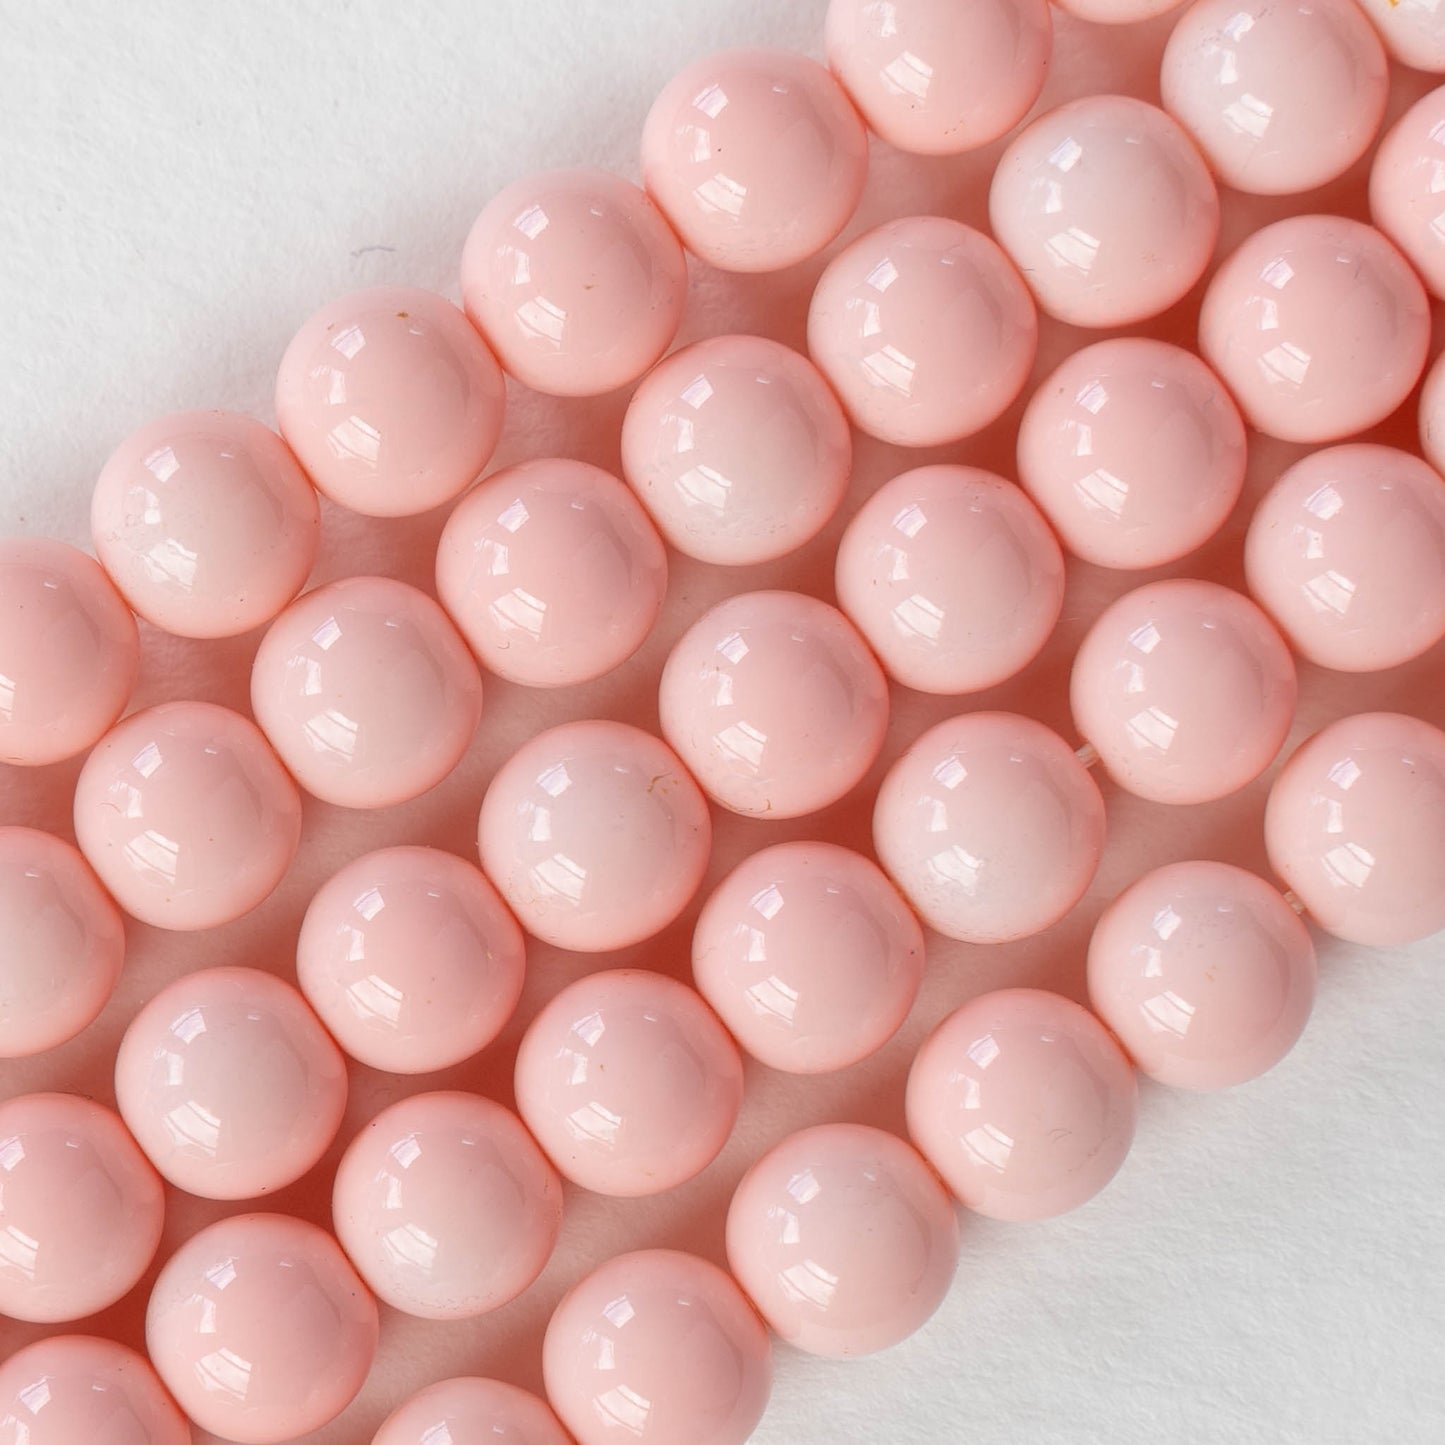 8mm Round Beads - Opaque Pink Rose - 25 beads